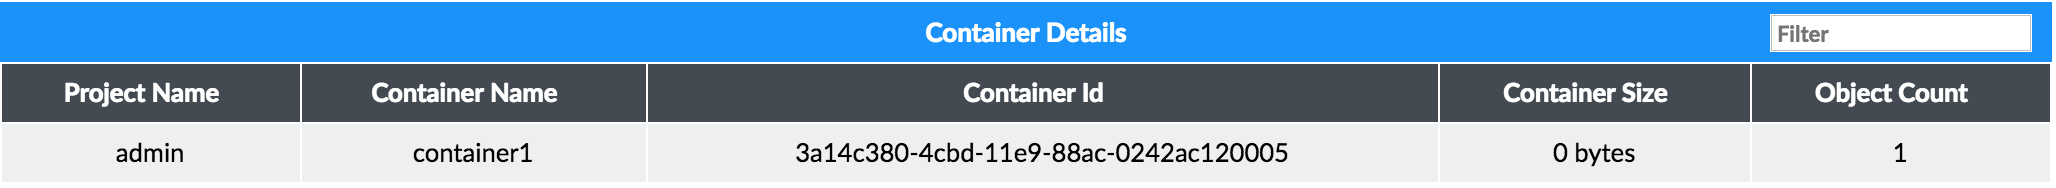 Swift Container Details